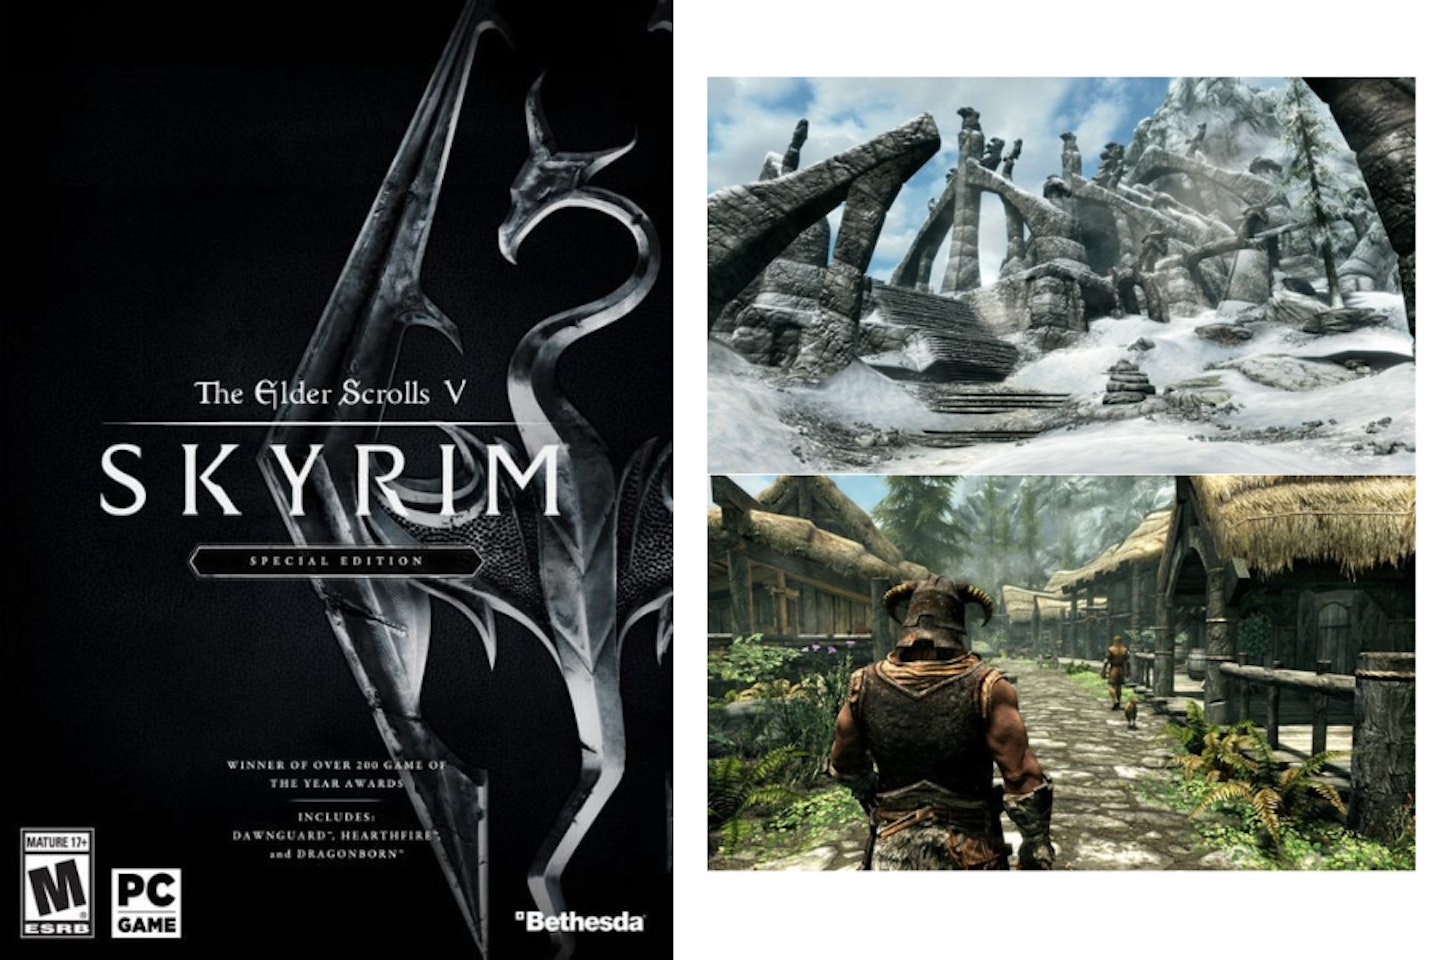 Skyrim Special Edition - one of the best PC games